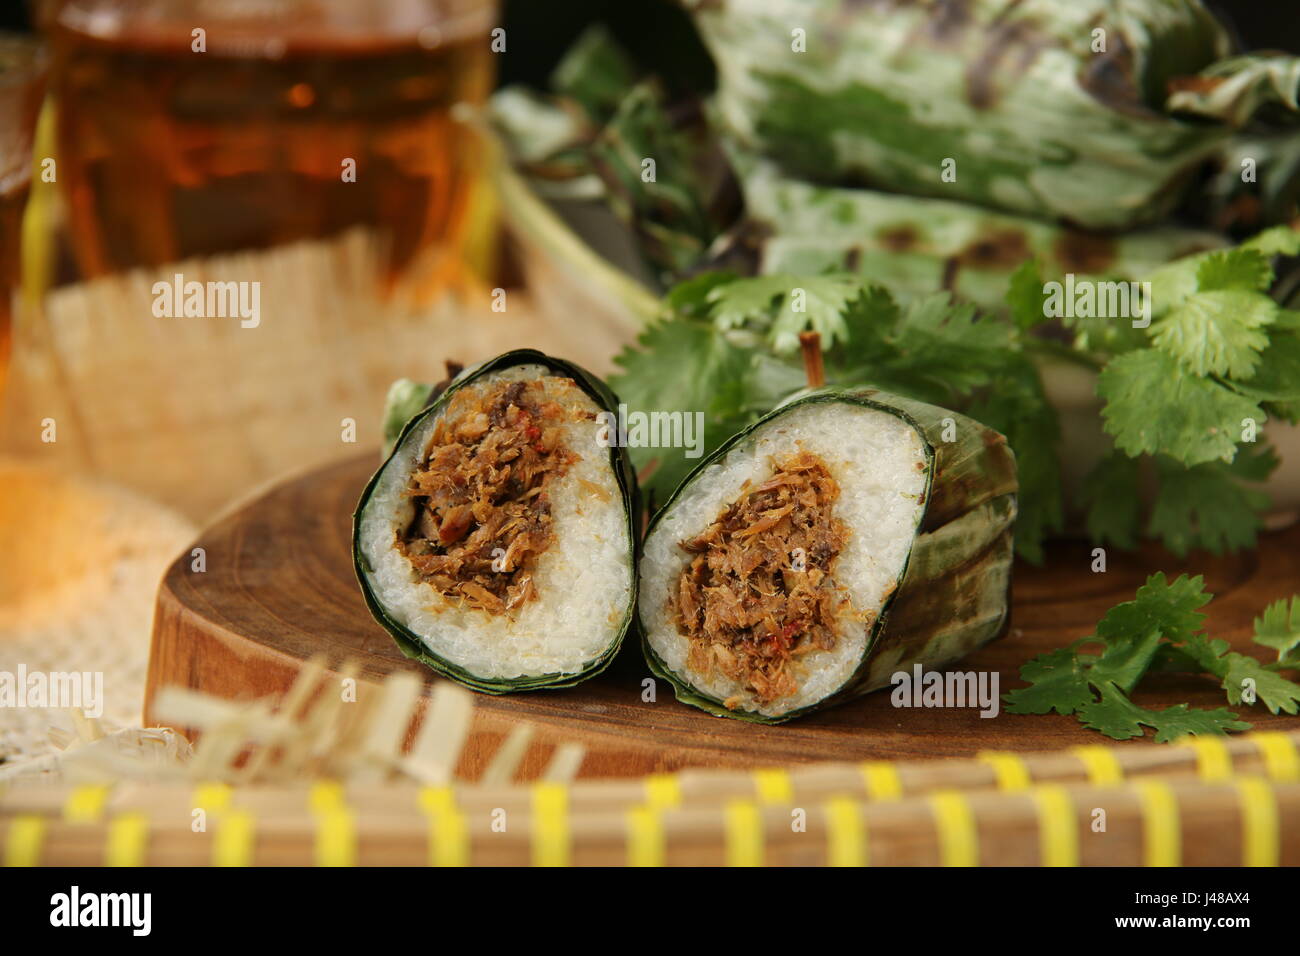 Lalampa, Grilled Rice Cake with Smoked Mackerel from Manado Stock Photo